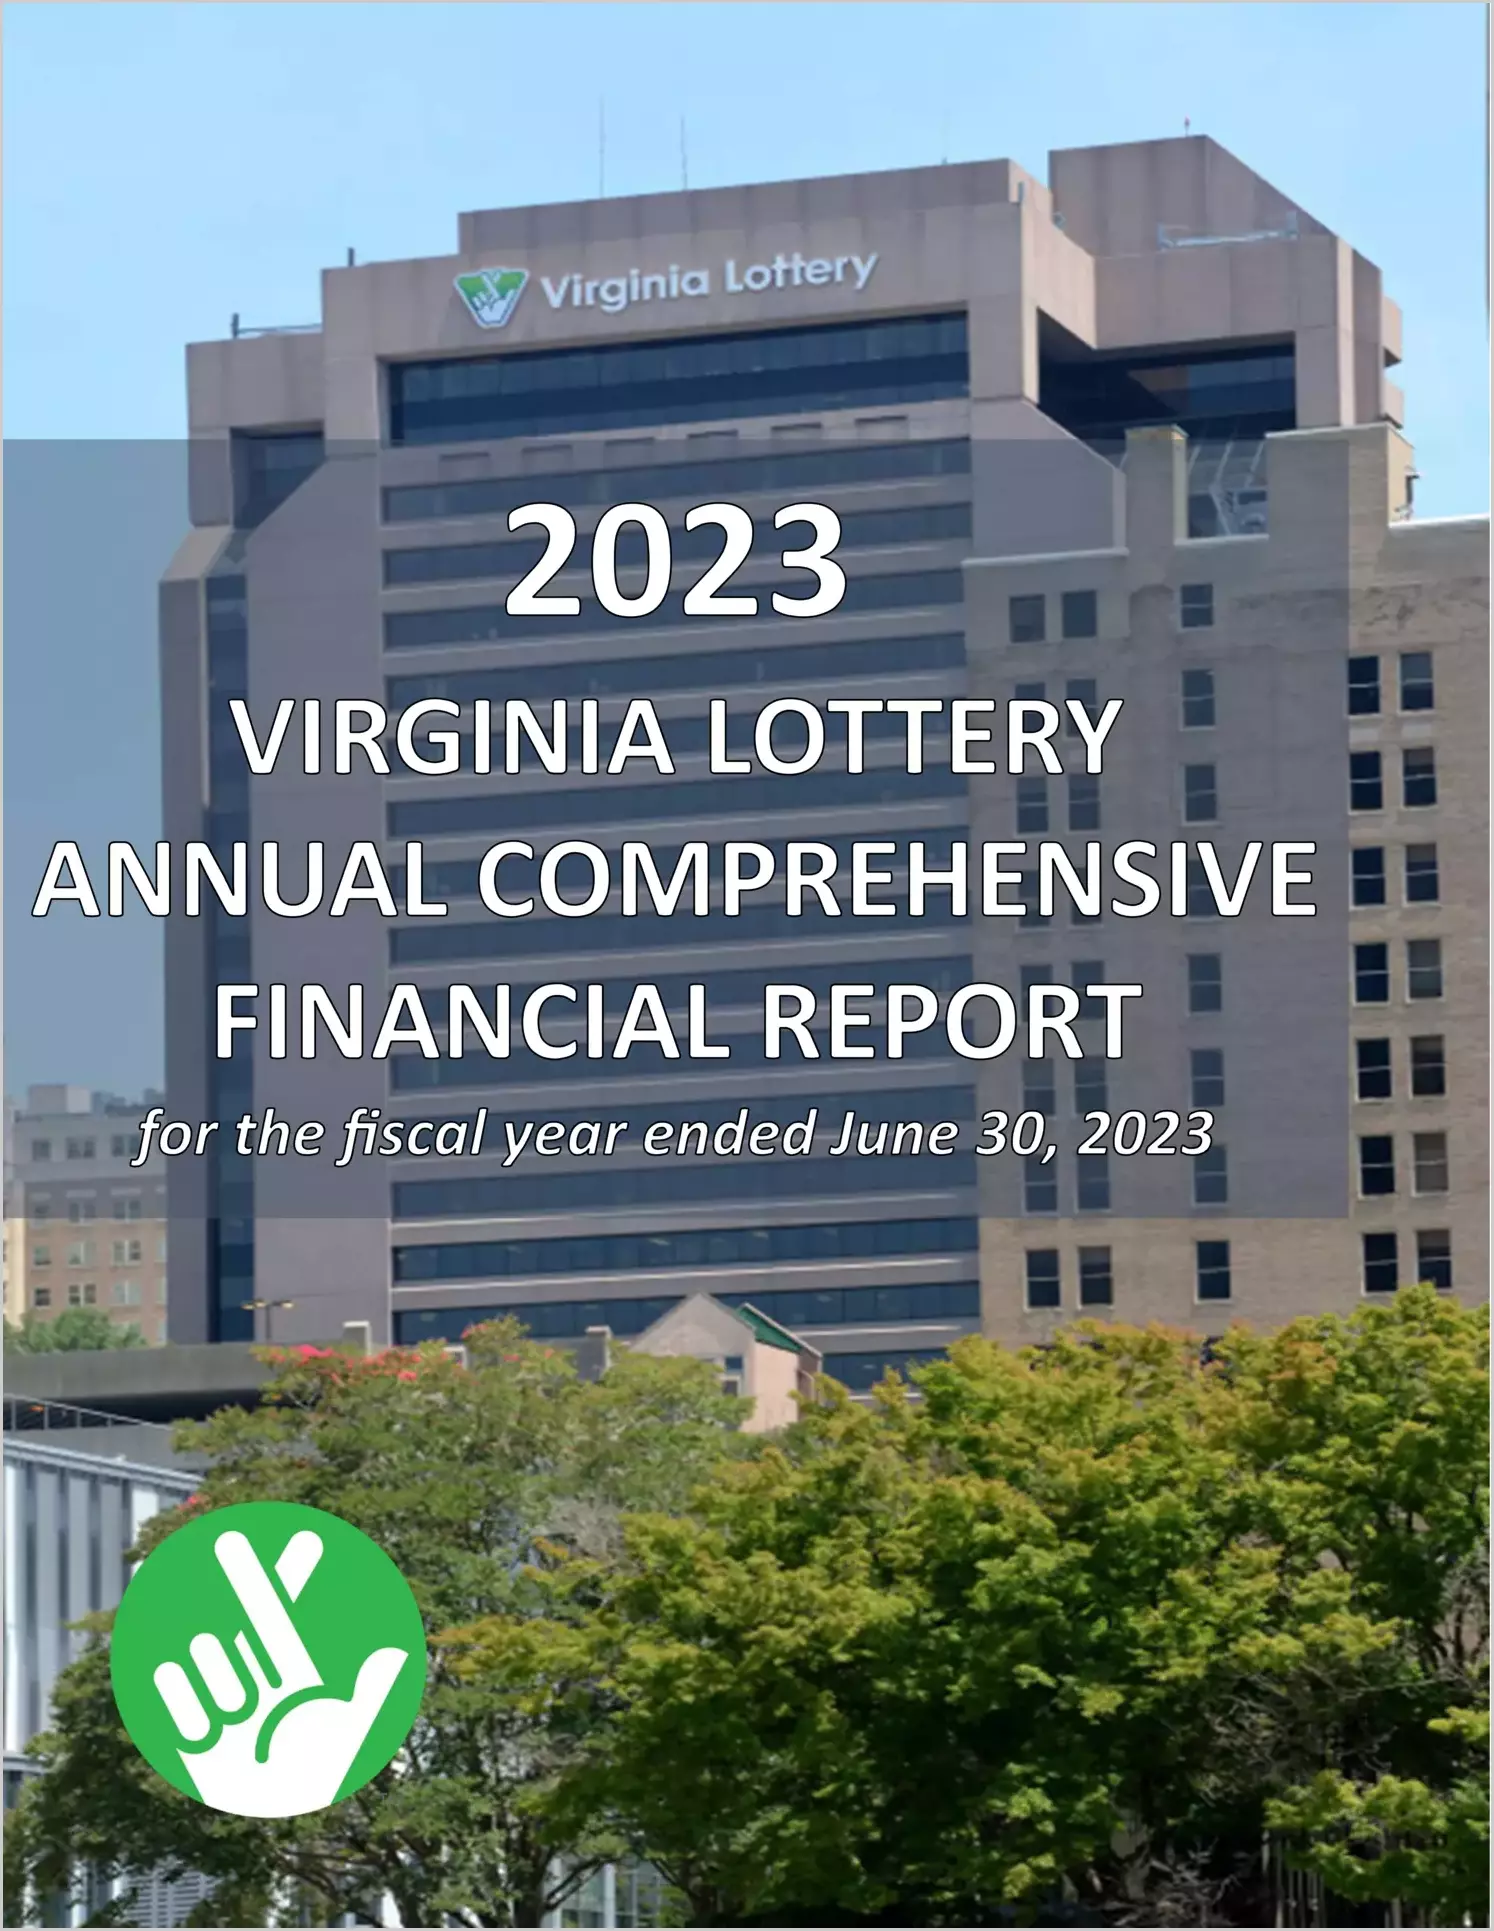 Virginia Lottery Annual Comprehensive Financial Report for the fiscal year ended June 30, 2023